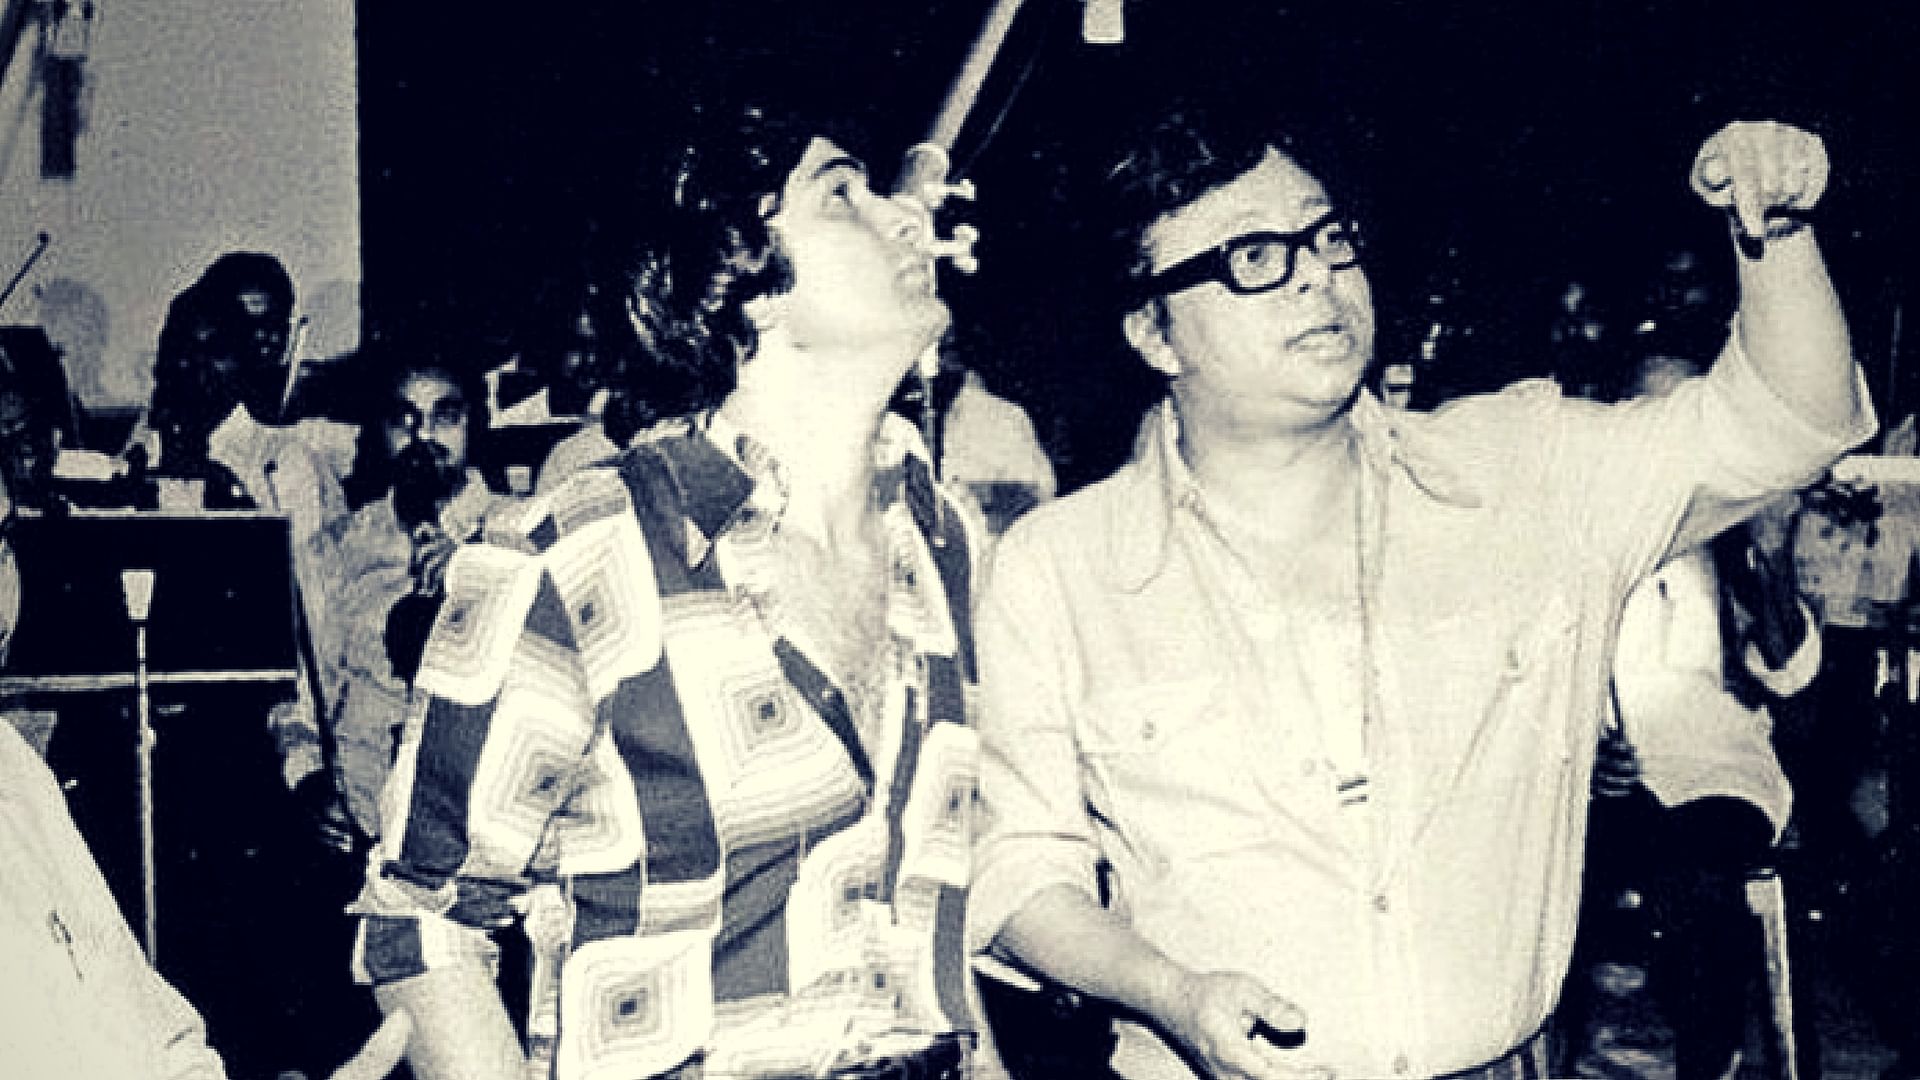  Rishi Kapoor remembers RD Burman in a rather nostalgic interview.